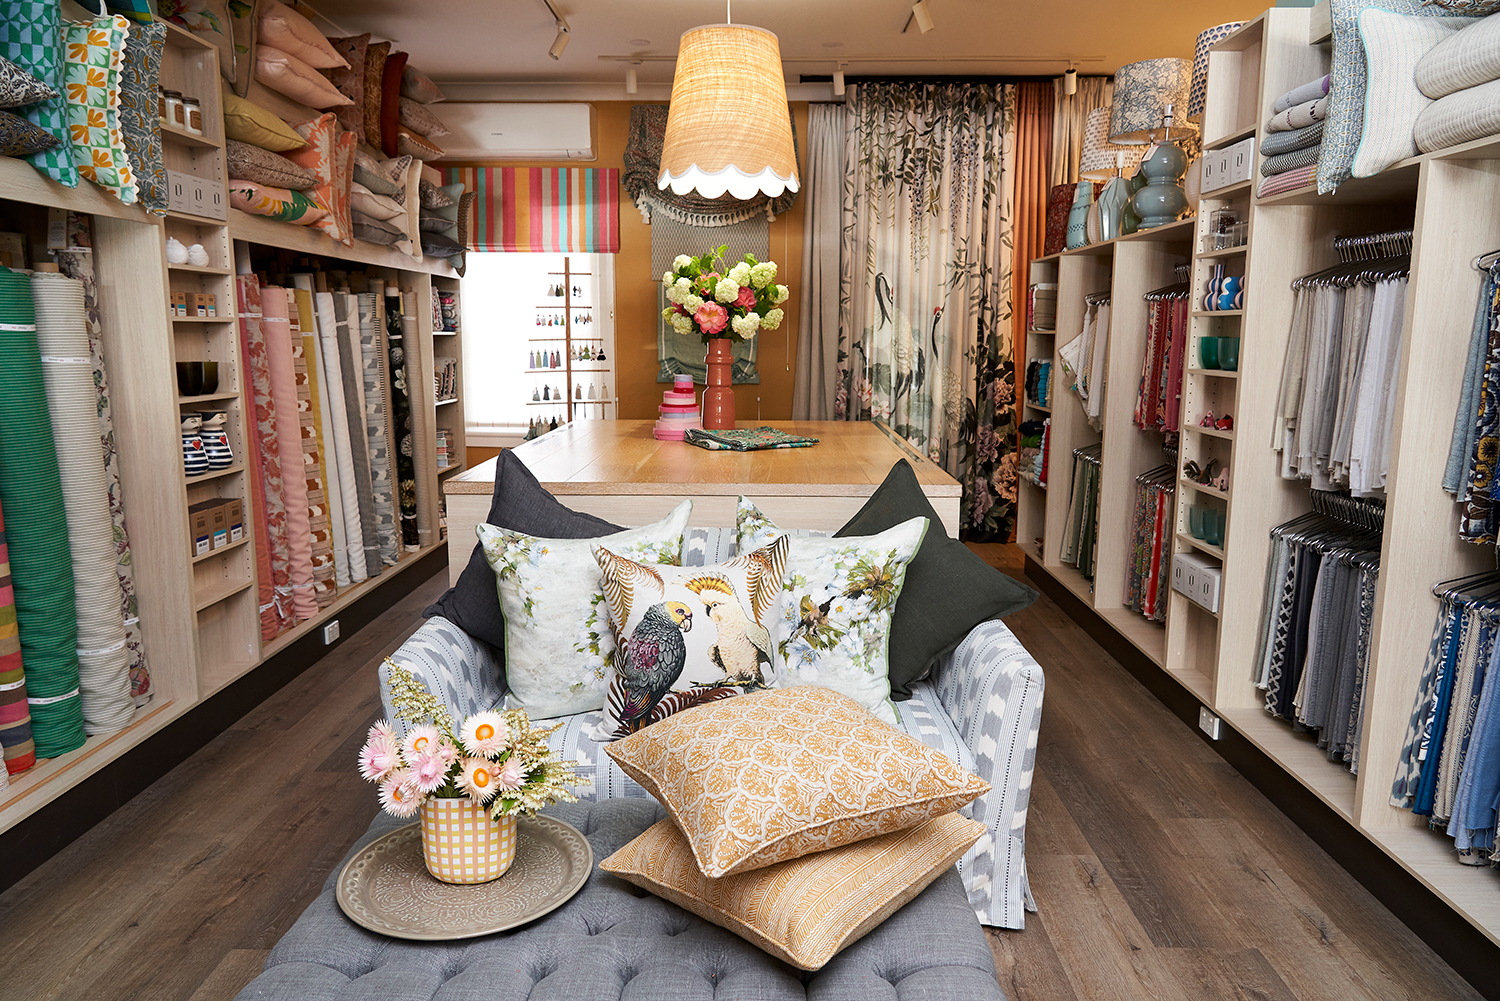 No Chintz Willoughby - Textiles and Interior Decorating Shop